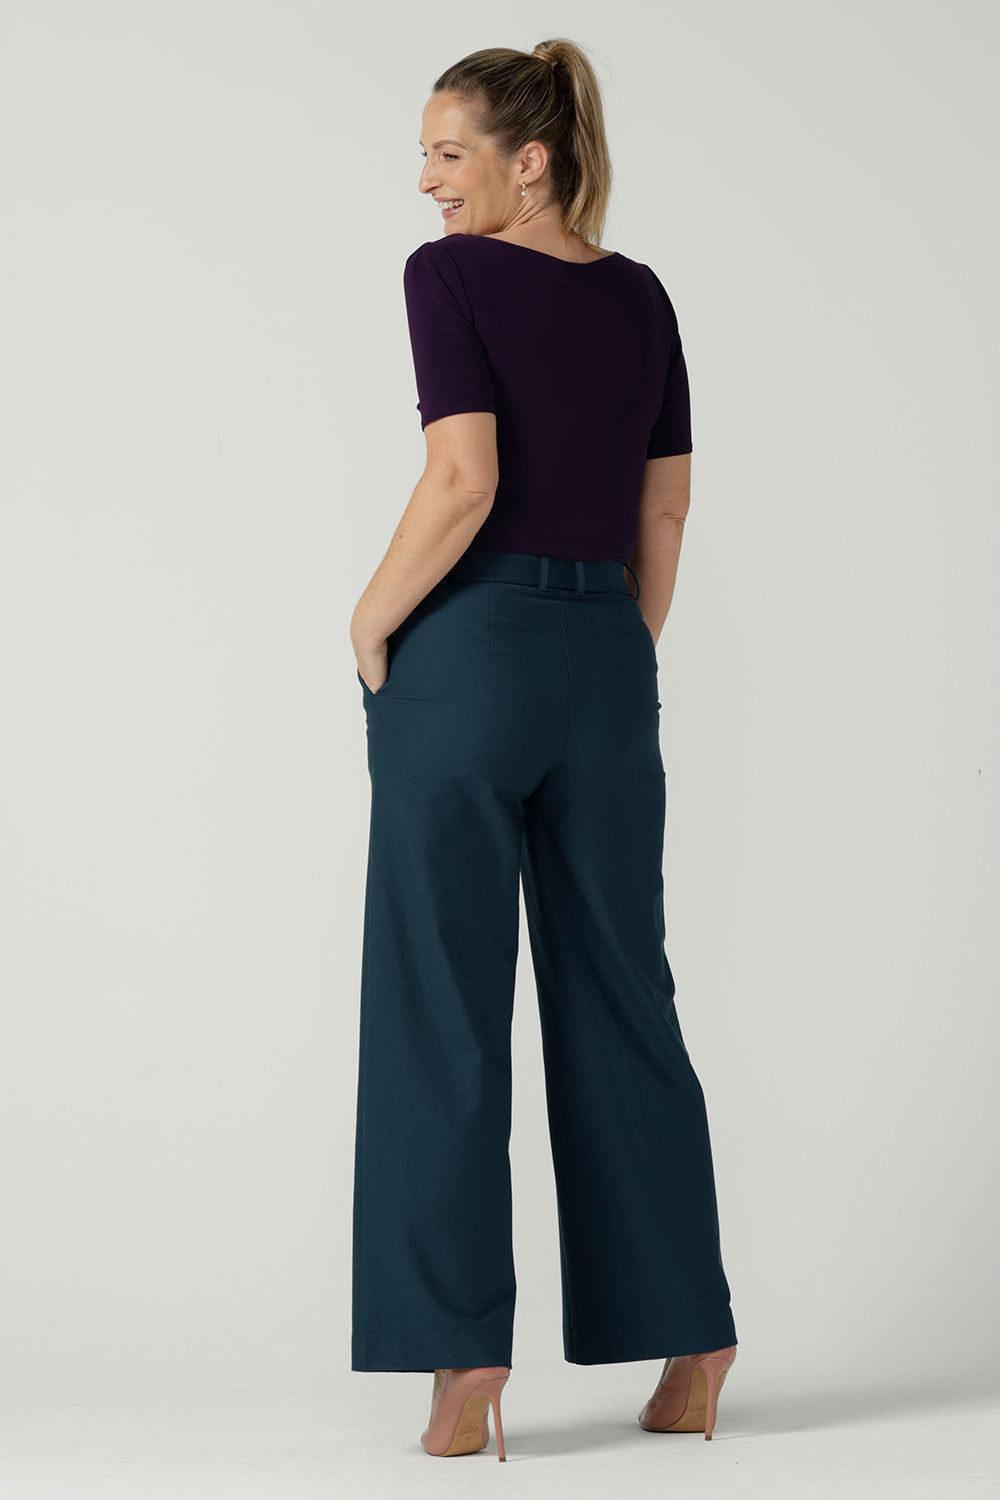 Back view of a Size 10 woman wears the Ziggy top in Amethyst, a boat neckline style with a pleat tuck on the sleeve head and slight curve hem. Made in Australia for women size 8 - 24.